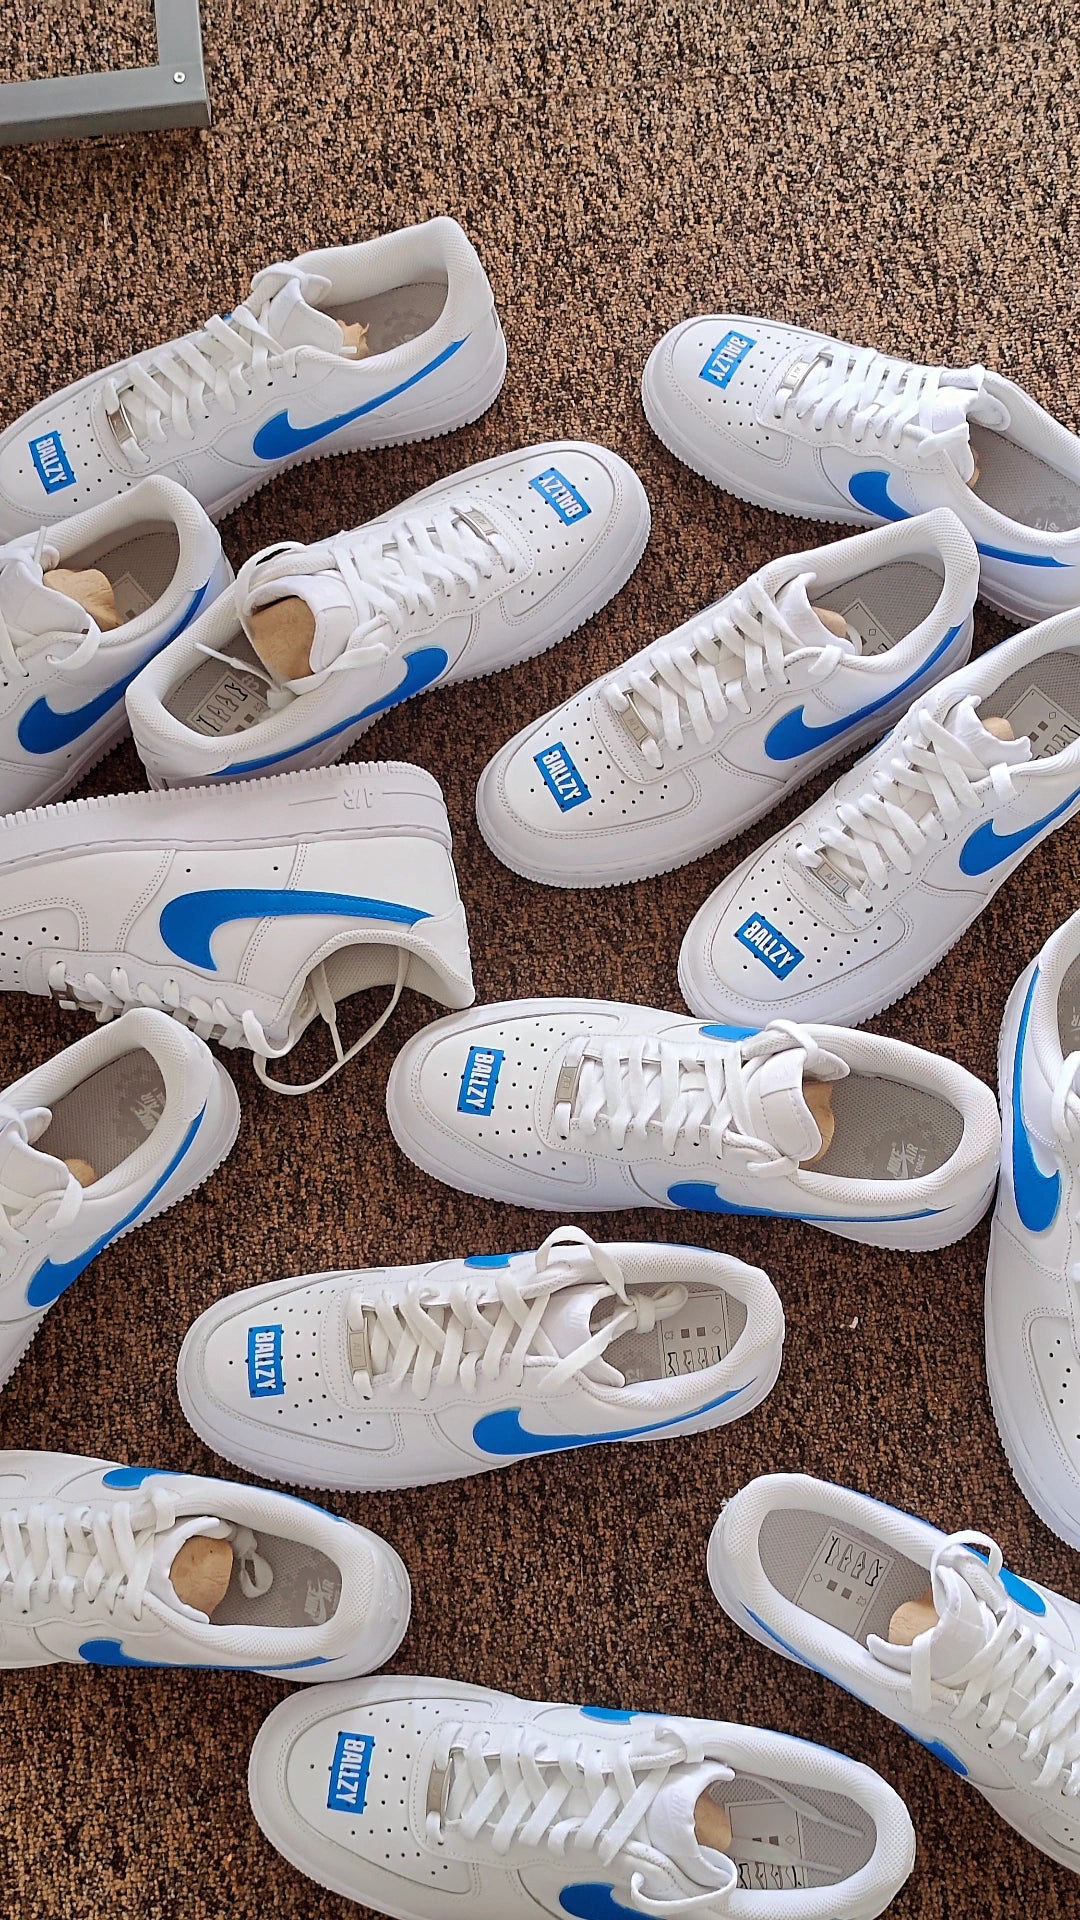 custom air force 1 sneakers with a blue box logo design and blue nike logos, picture features multiple pairs of custom nike air force 1s